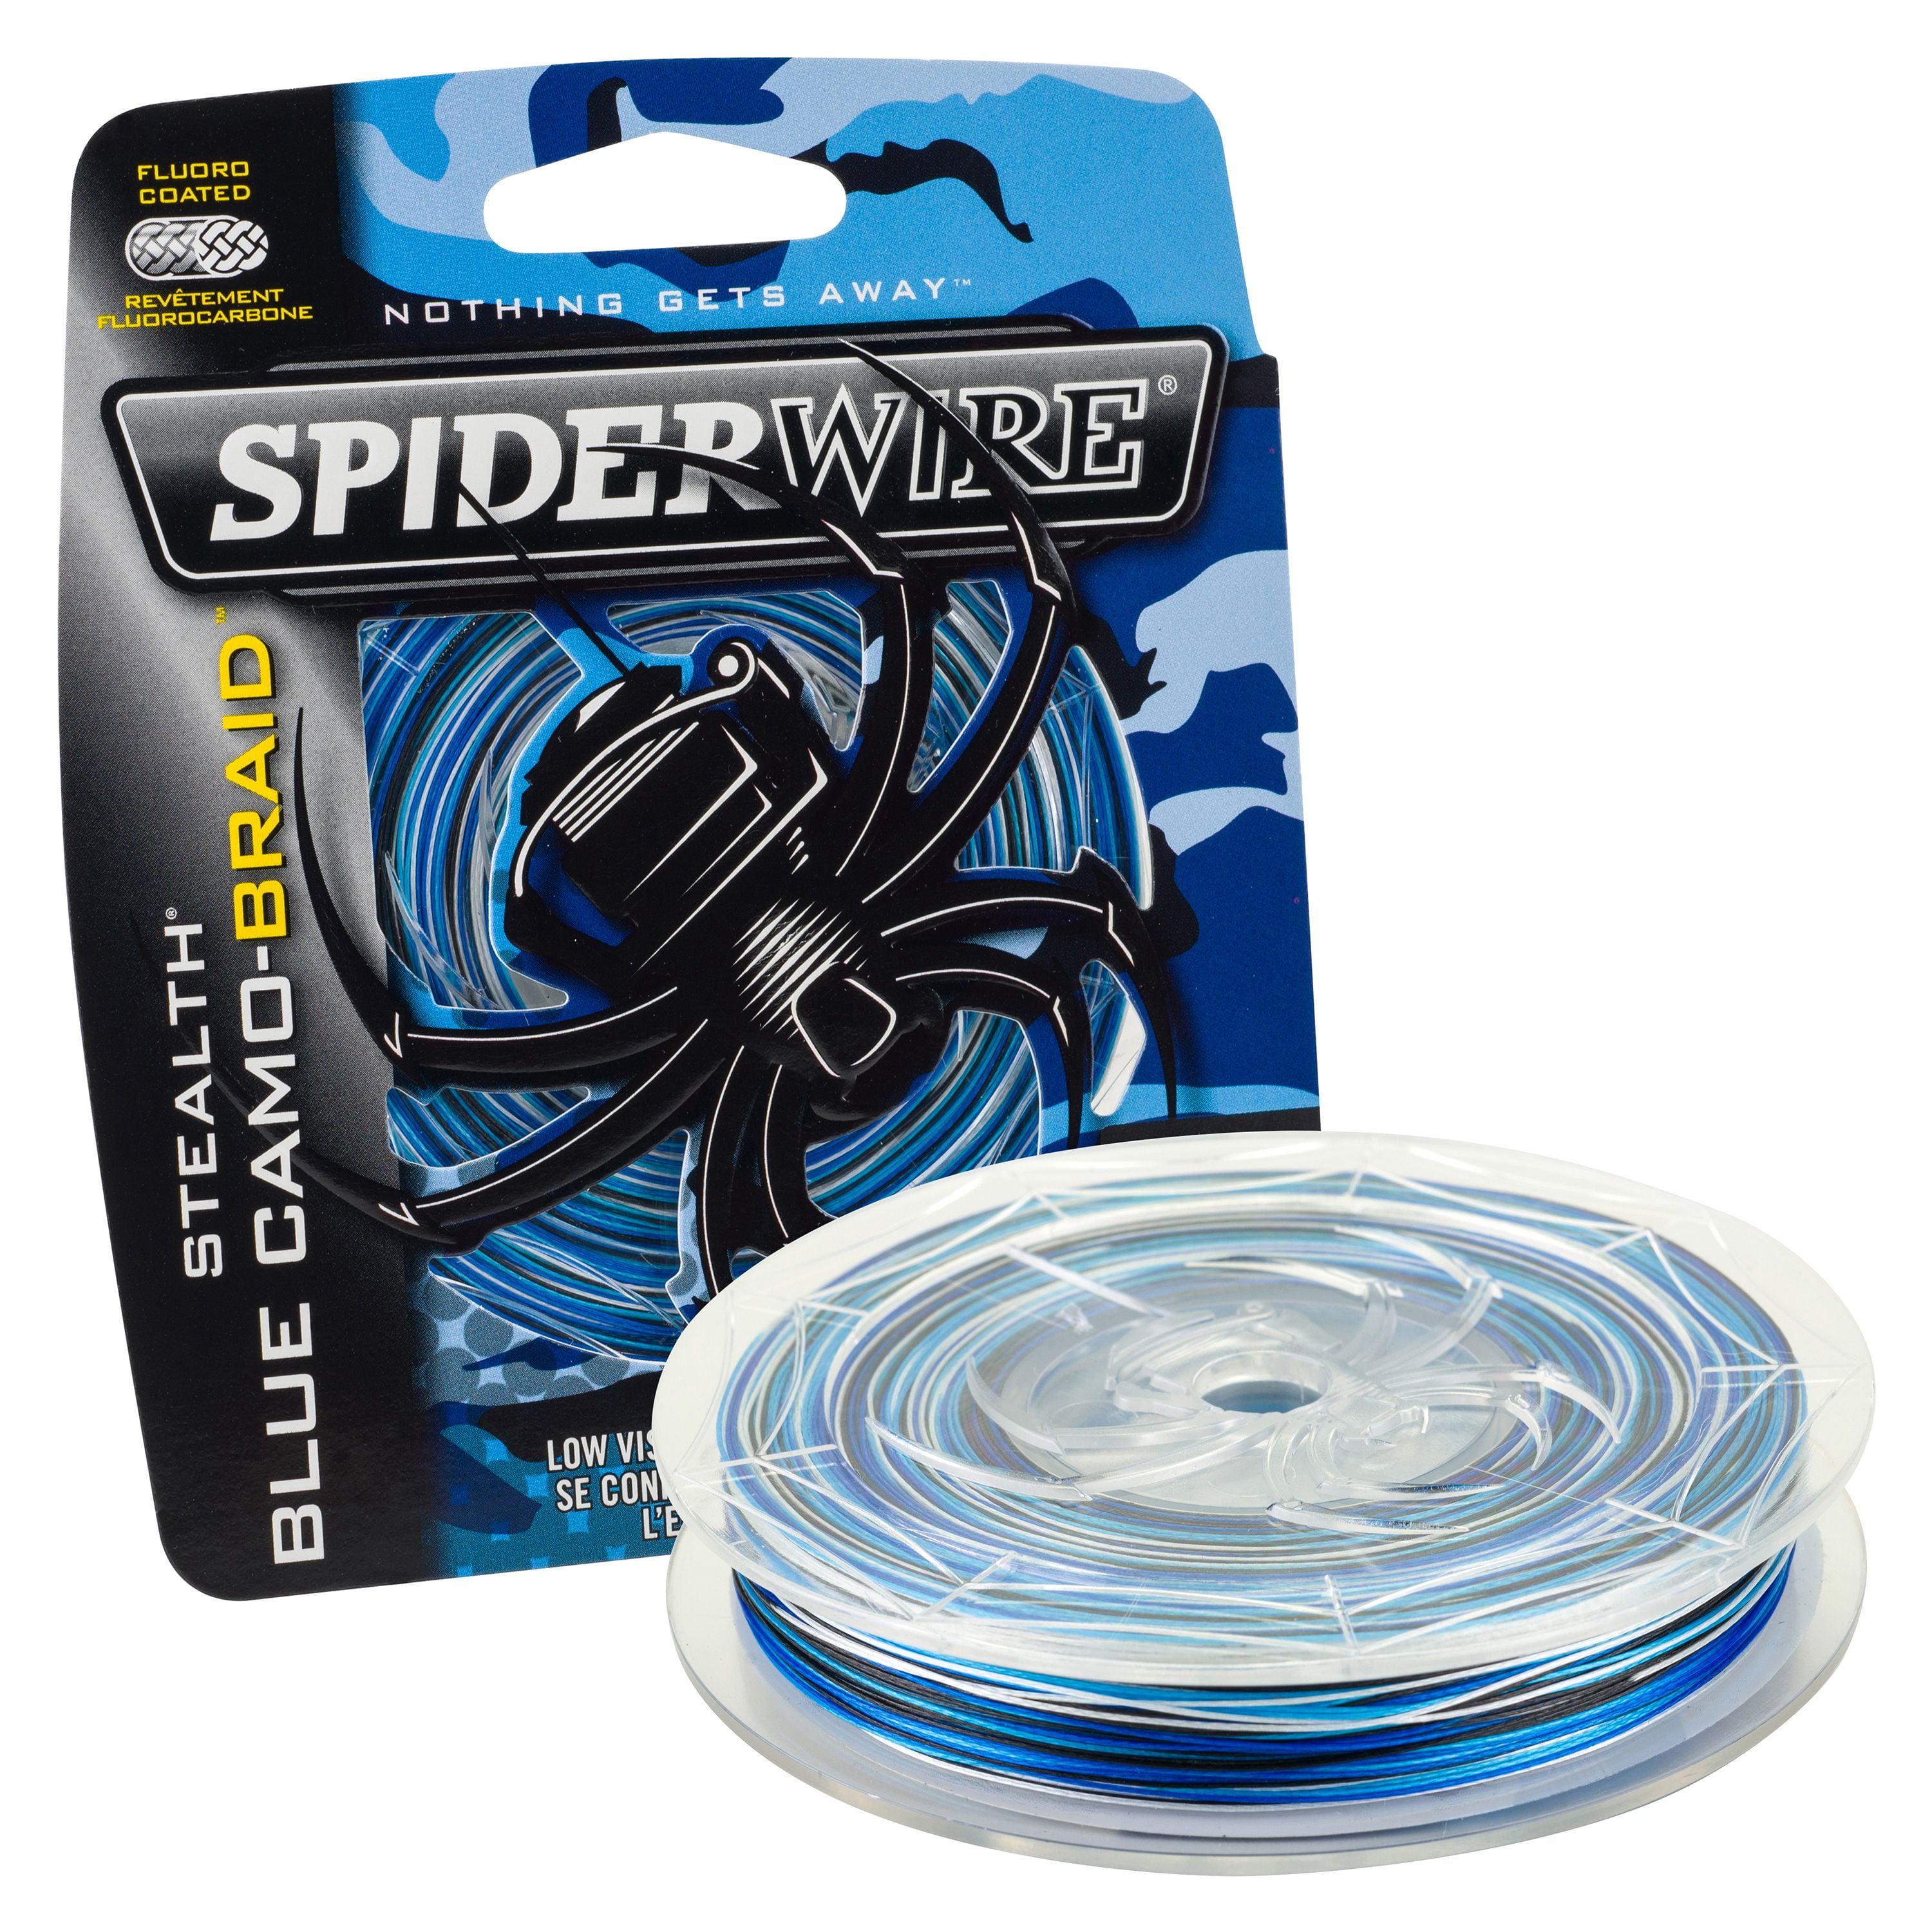  SpiderWire Stealth Superline, Blue Camo, 20lb9kg,  1500yd1371m Braided Fishing Line, Suitable For Saltwater And Freshwater  Environments